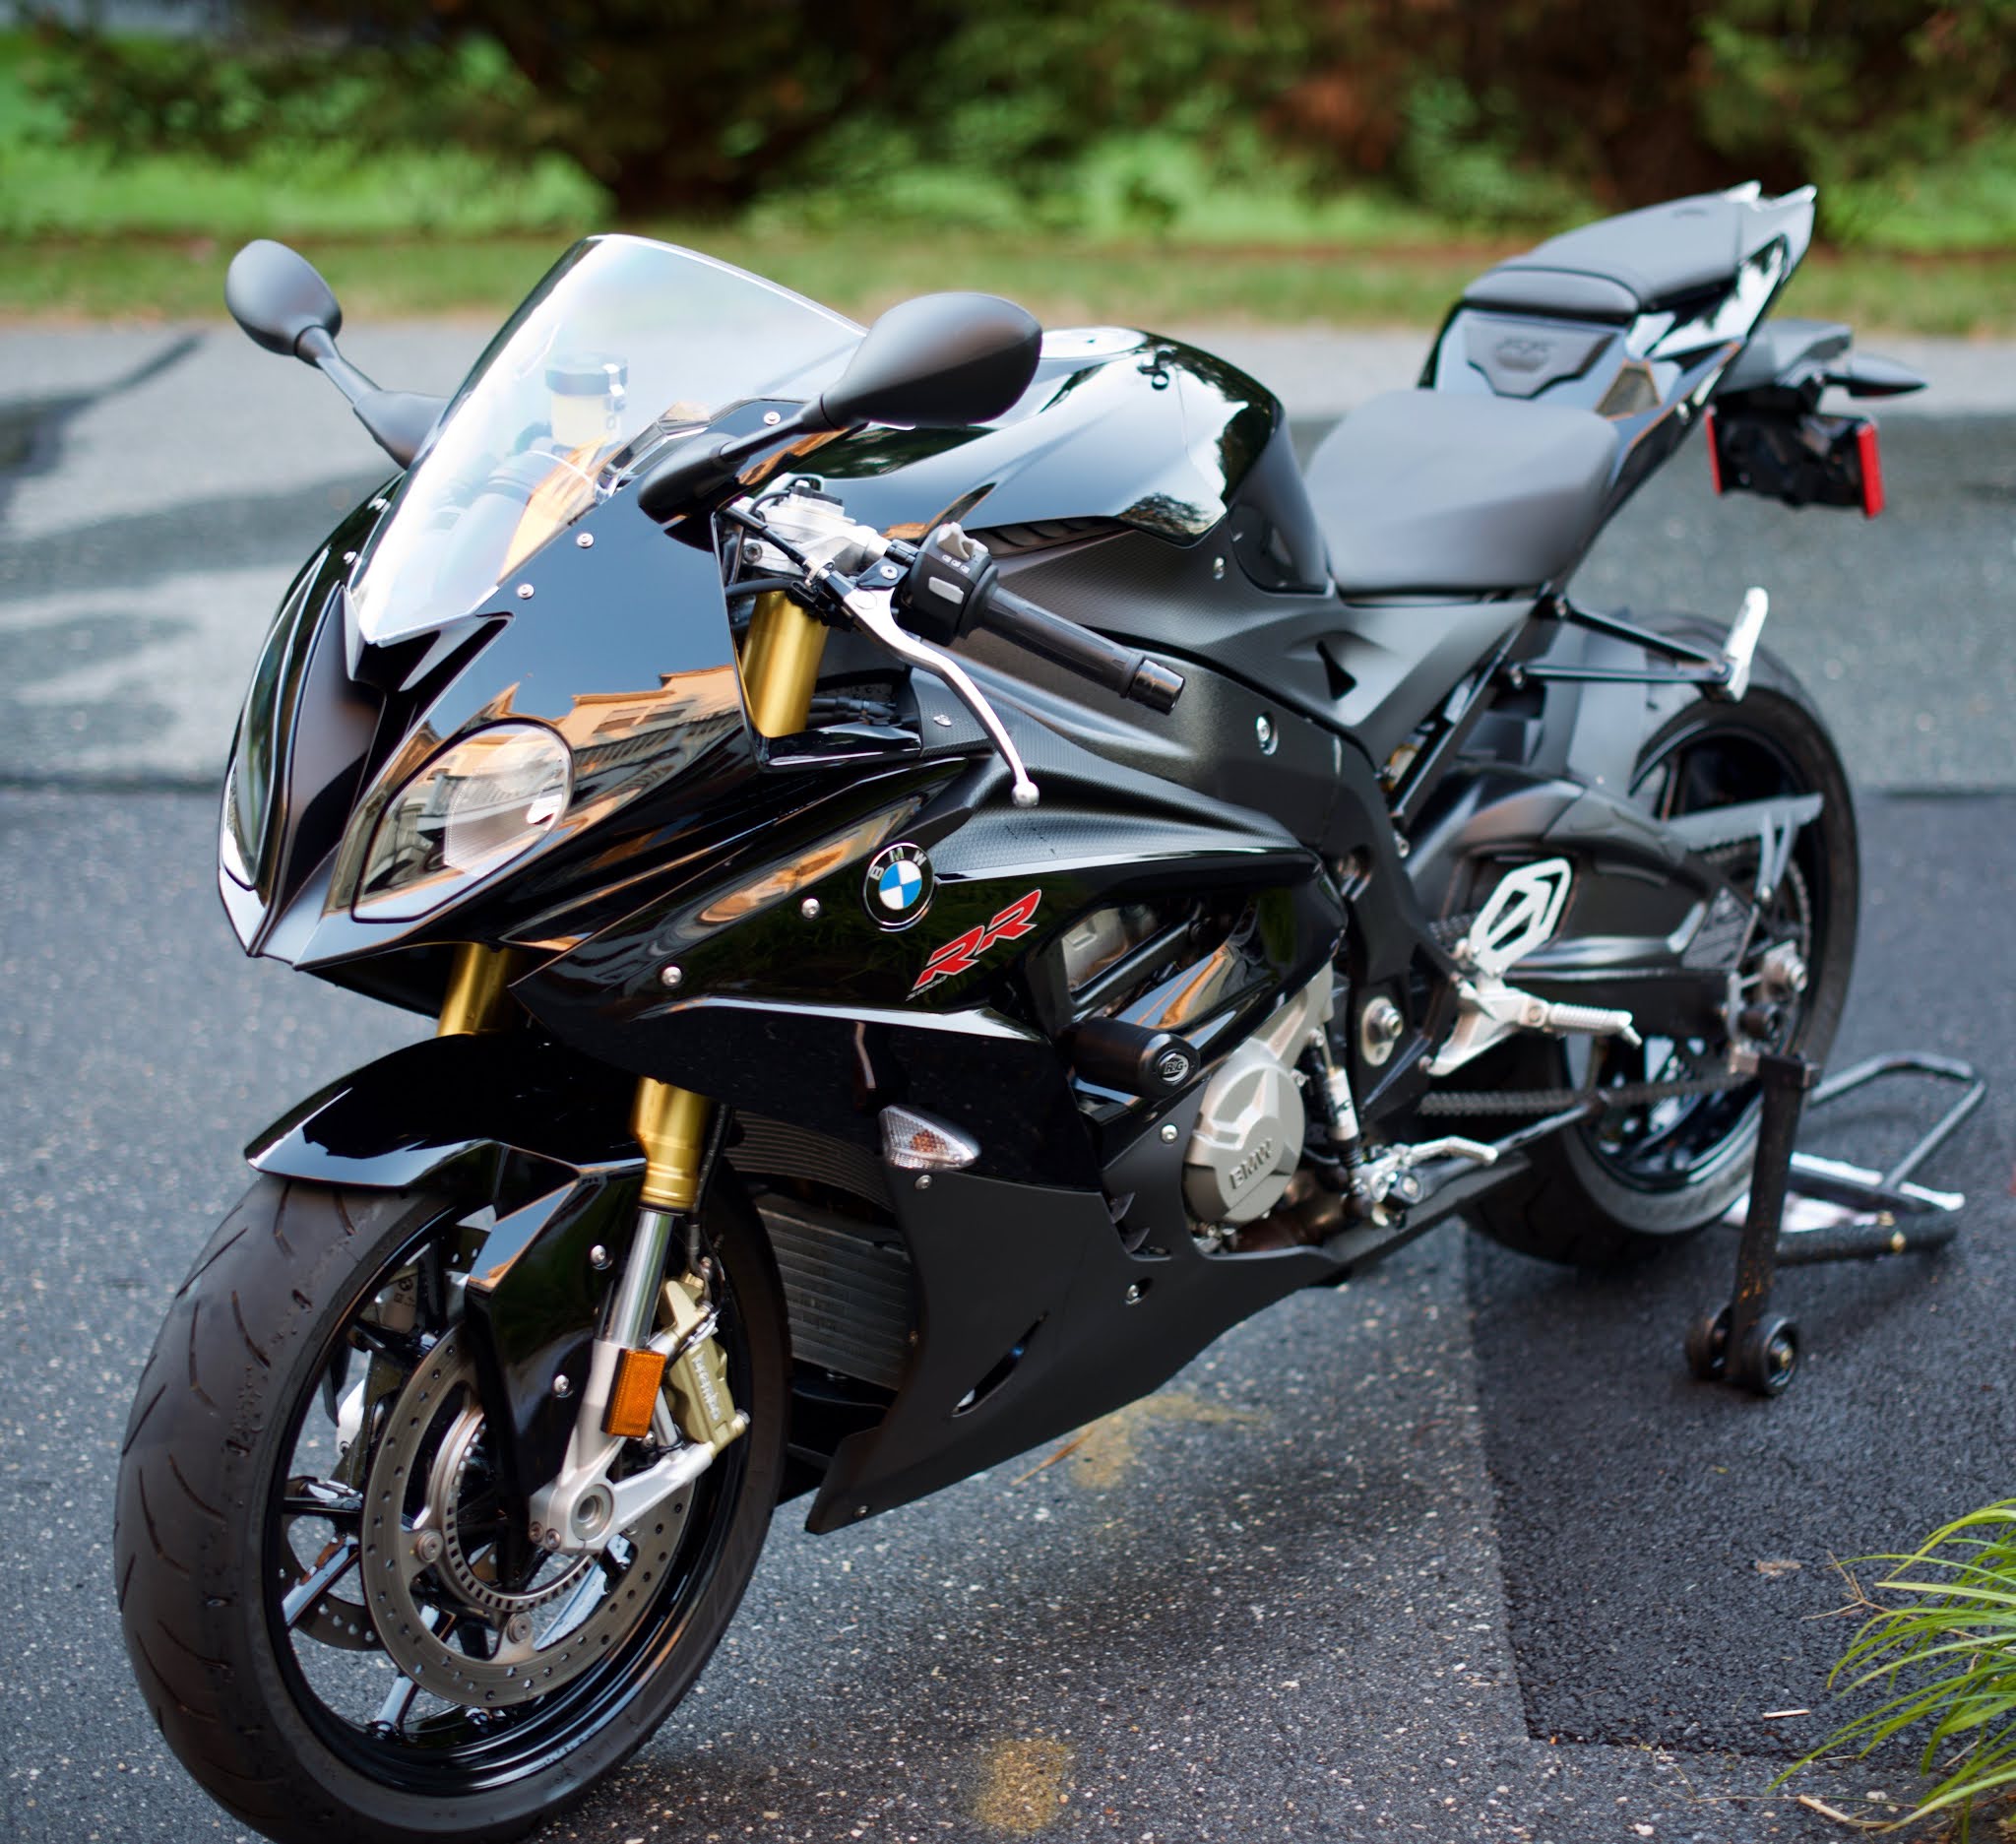 Bmw S1000 Rr Price In India Mileage Specifications Colors Top Speed And Servicing Periods